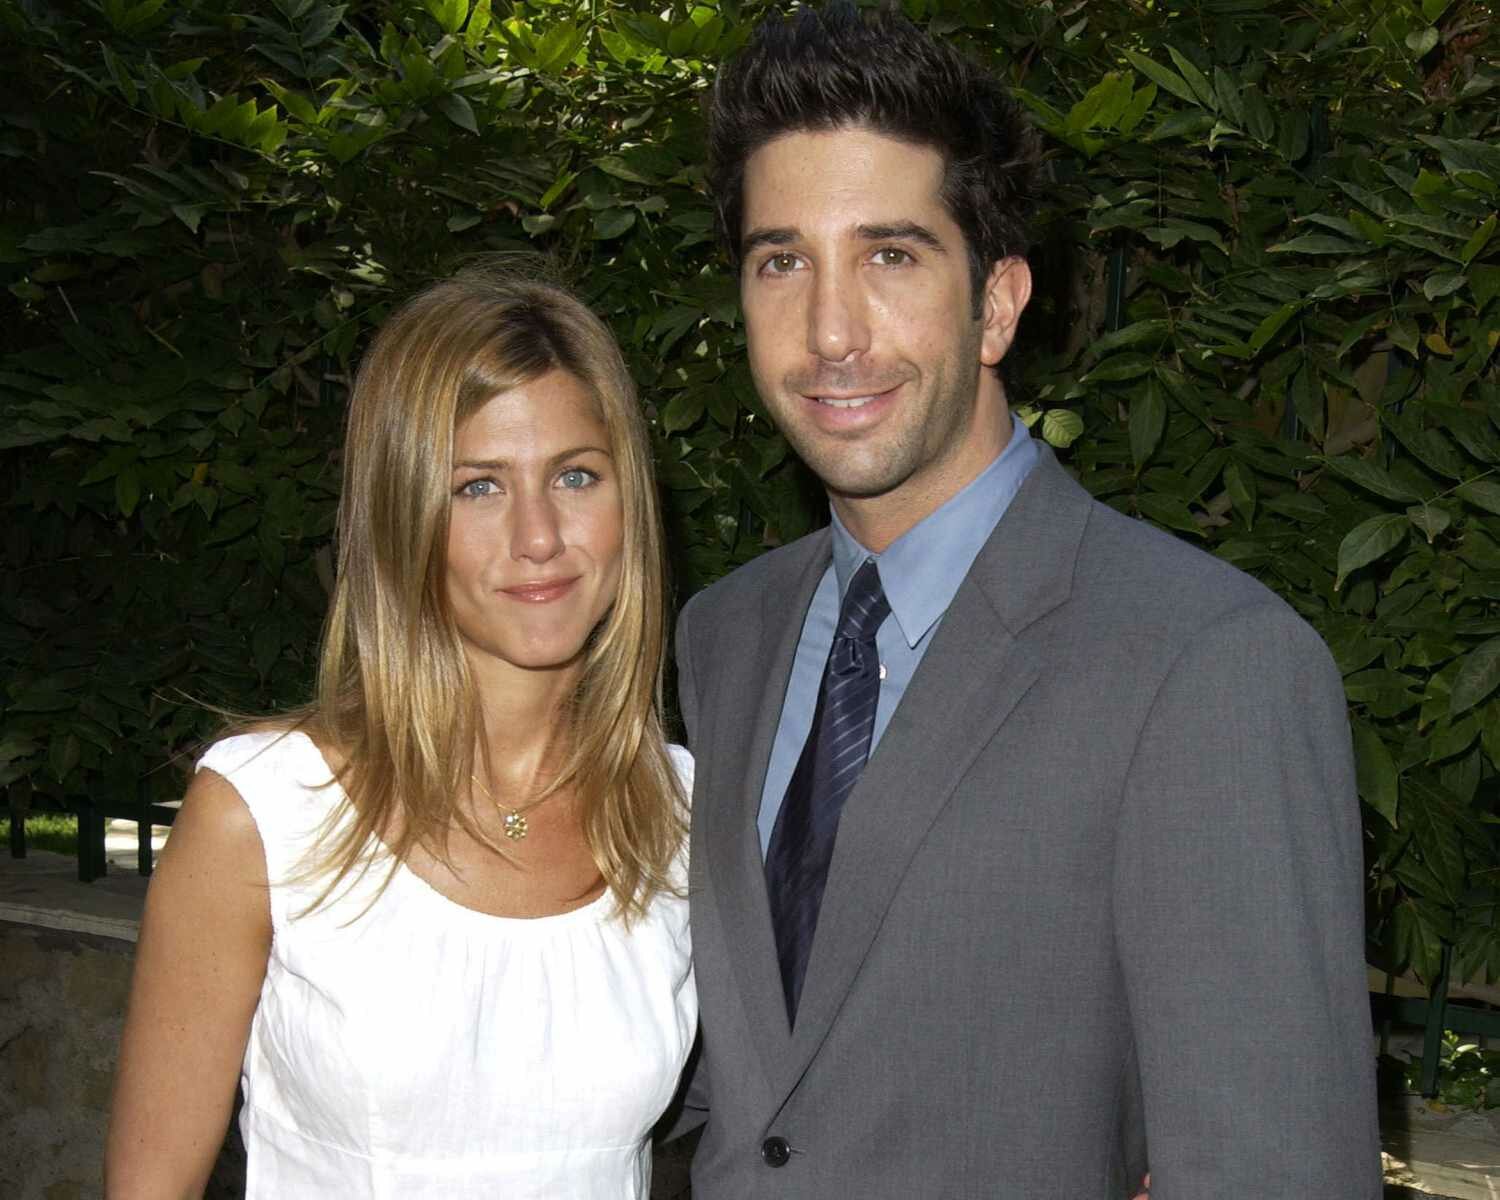 Jennifer Aniston Soft Smile Hand in Pocket and David Schwimmer Smiling in Suit 2003